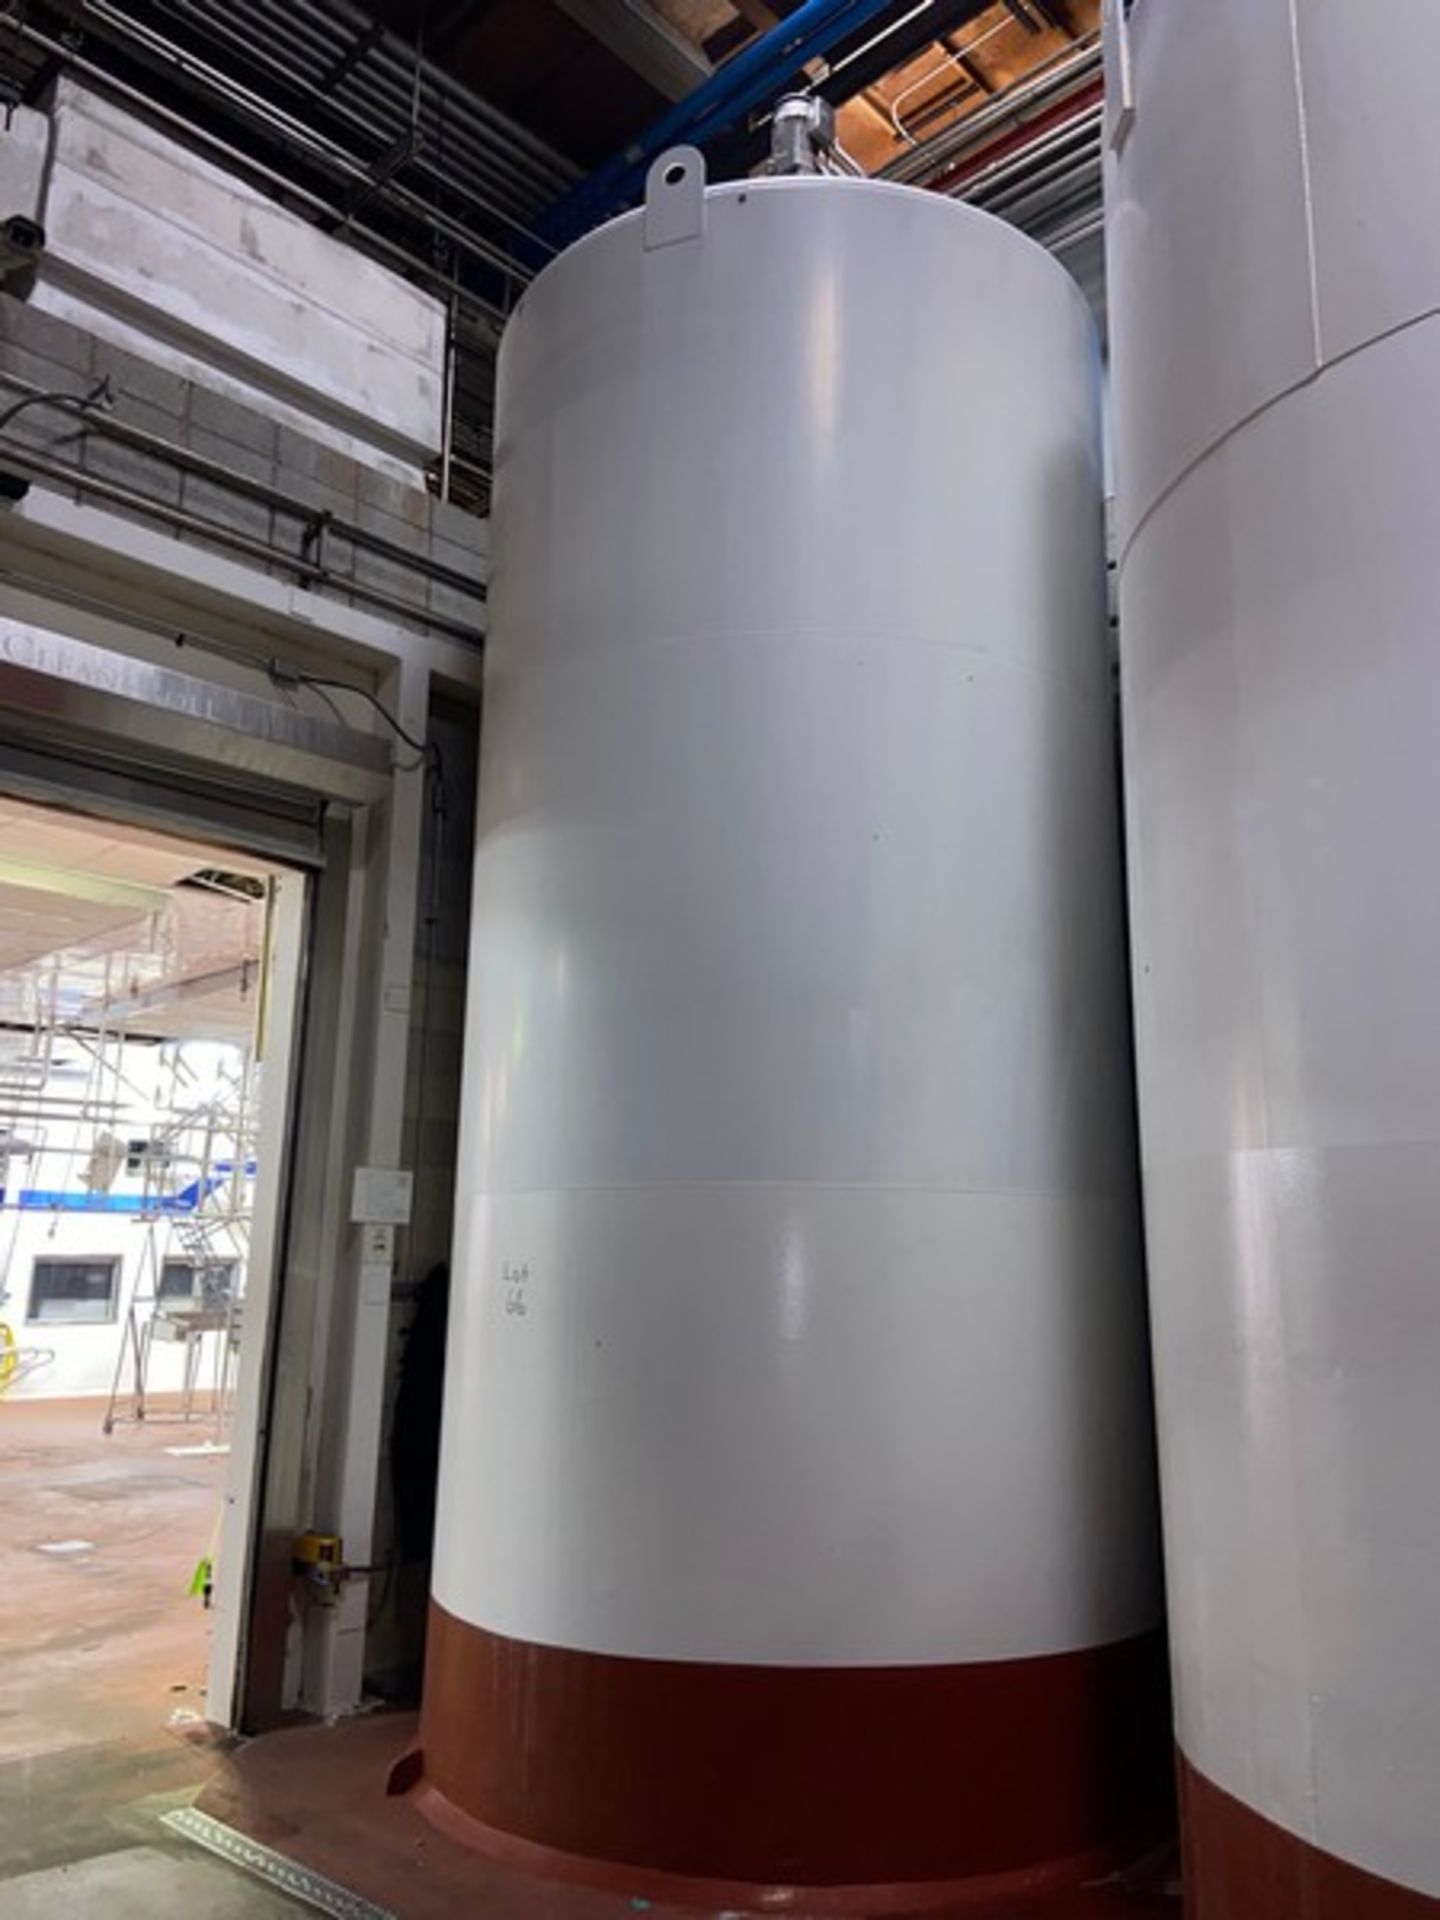 DCI 6,000 Gal. Jacketed S/S Silo, S/N JS-867, with S/S Alcove & (2) S/S Air Valves, Painted Exterior - Image 2 of 13